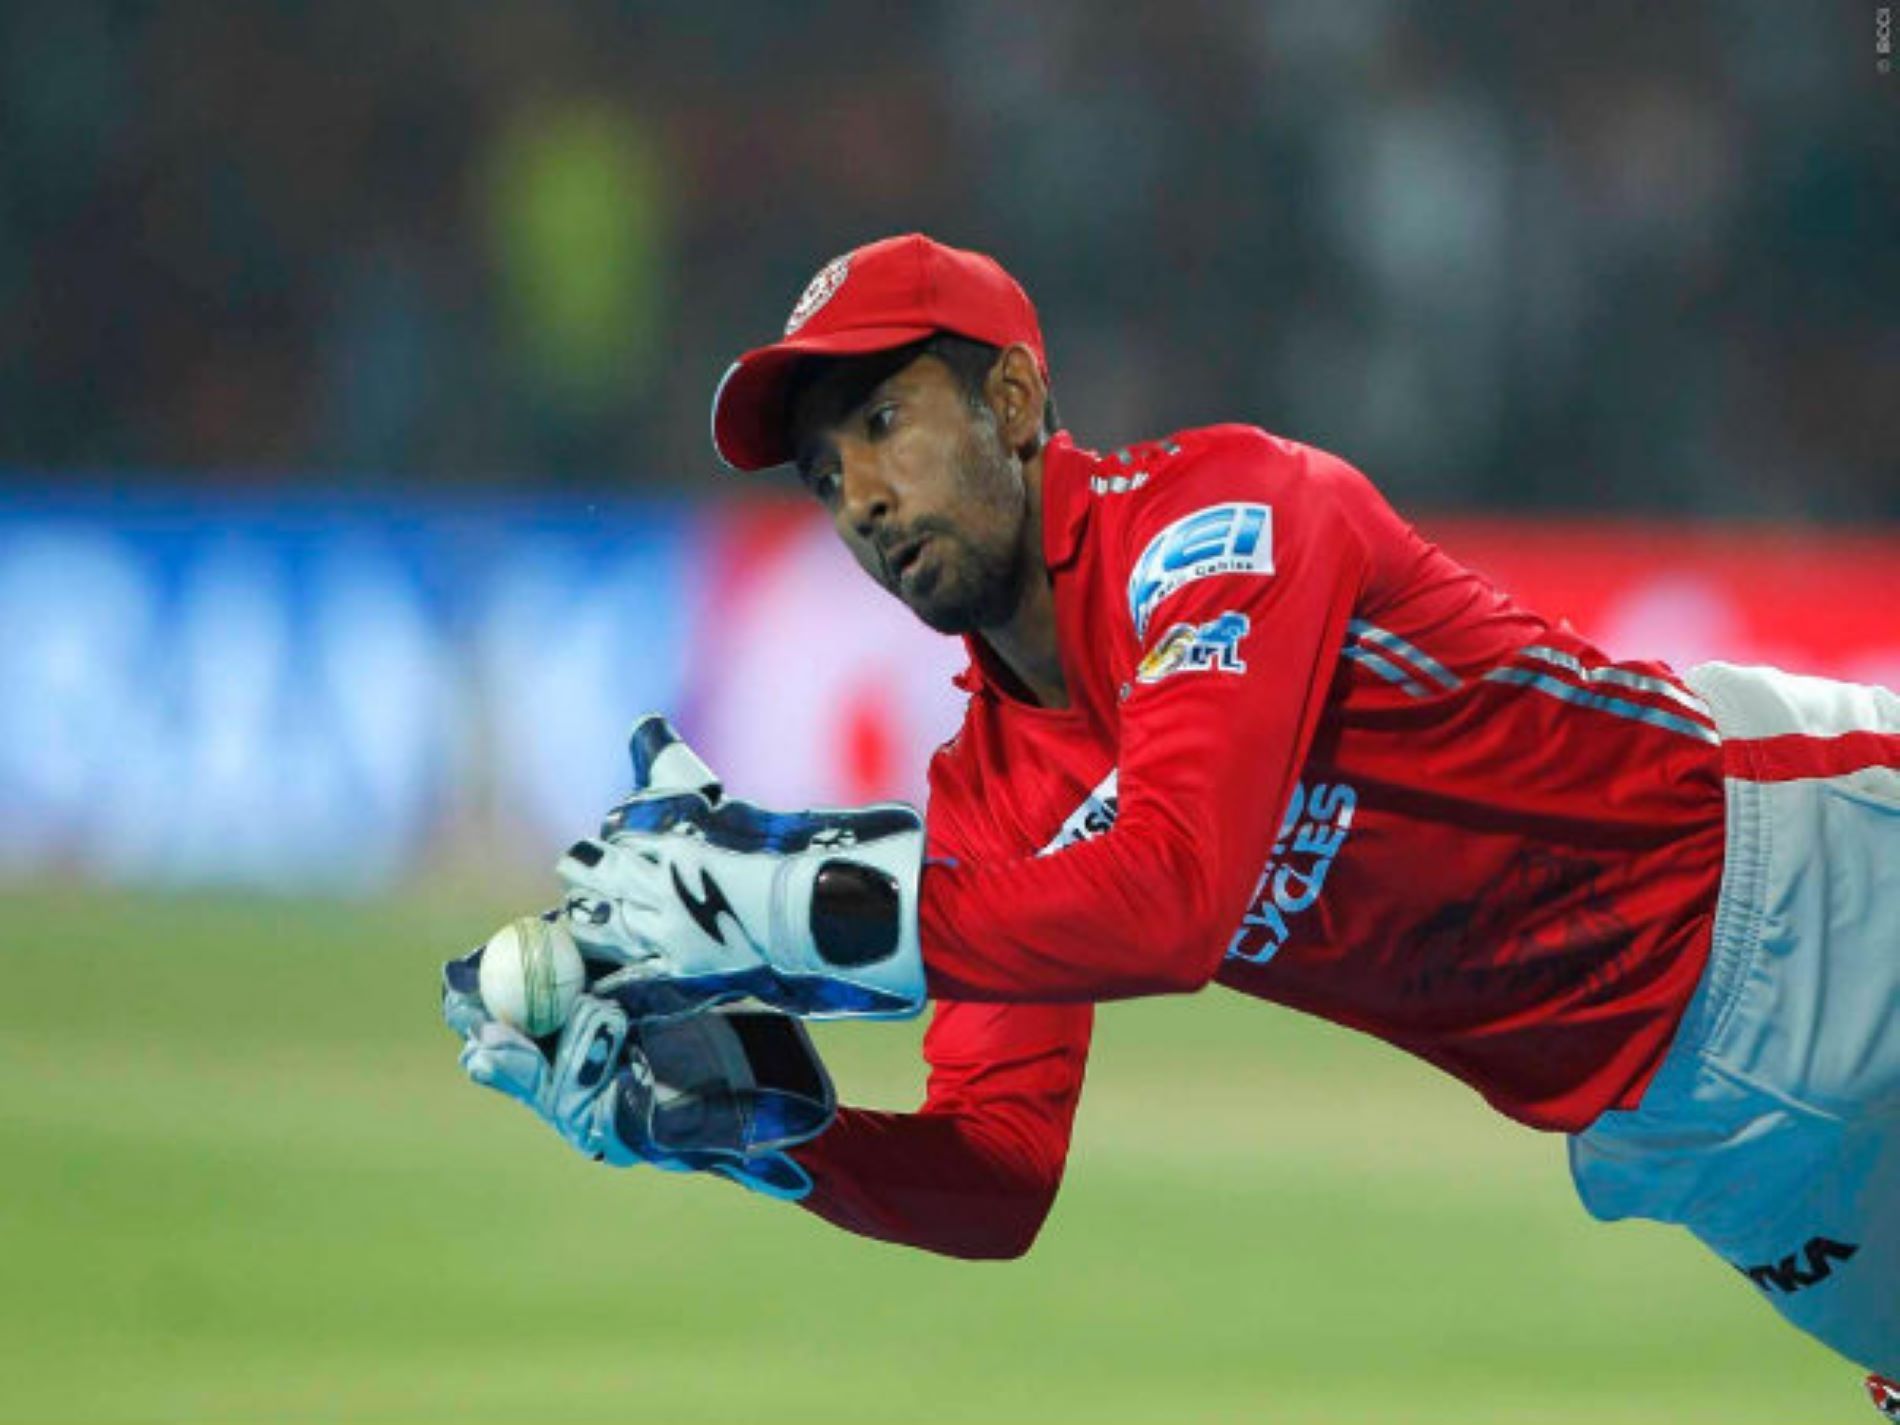 Saha has taken some of the best catches by a wicket keeper in IPL history